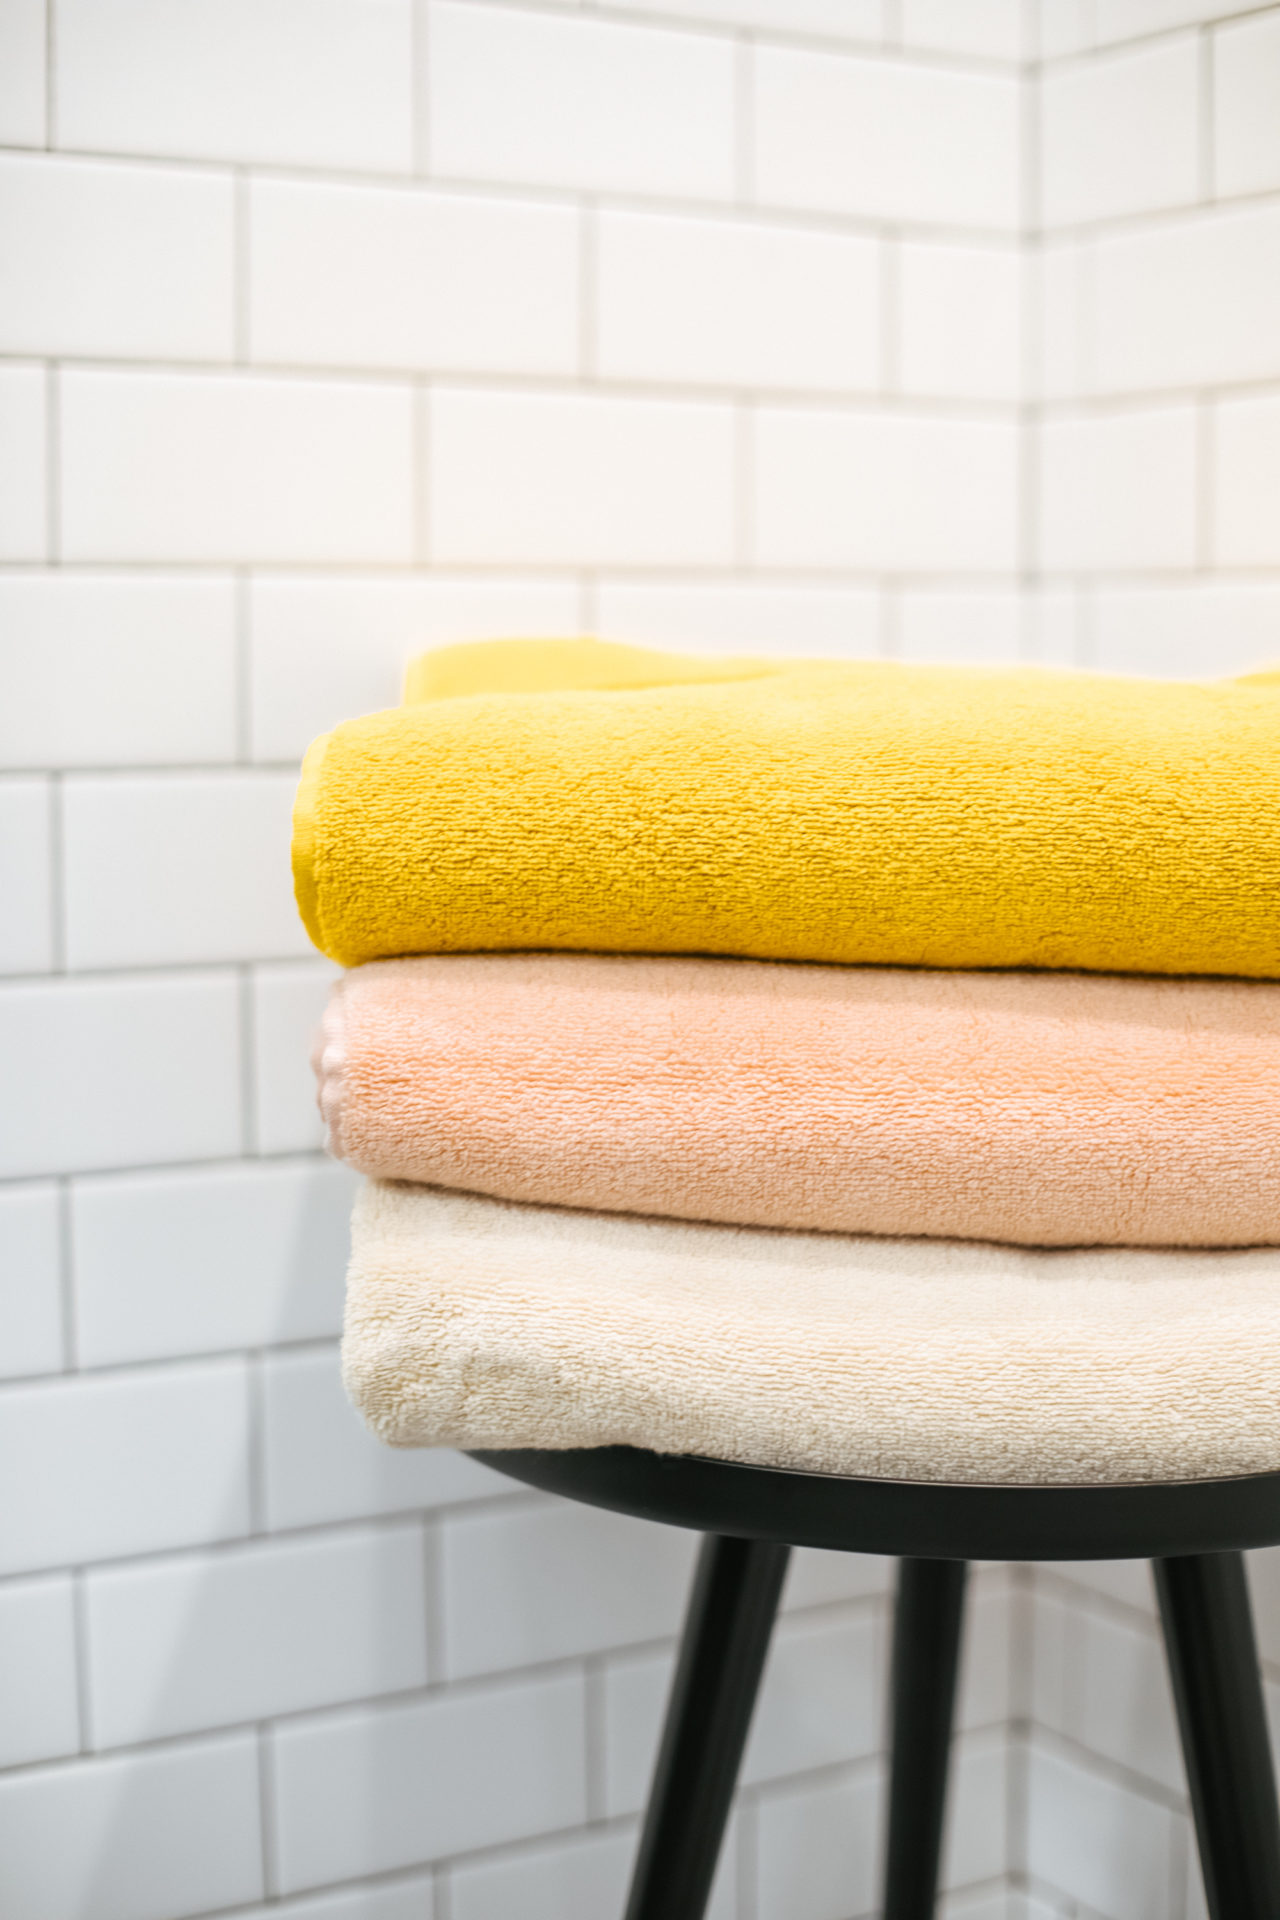 13 House Cleaner Habits You Should Totally Steal  Yellow bath towels,  Striped bath towels, Bath towel sets